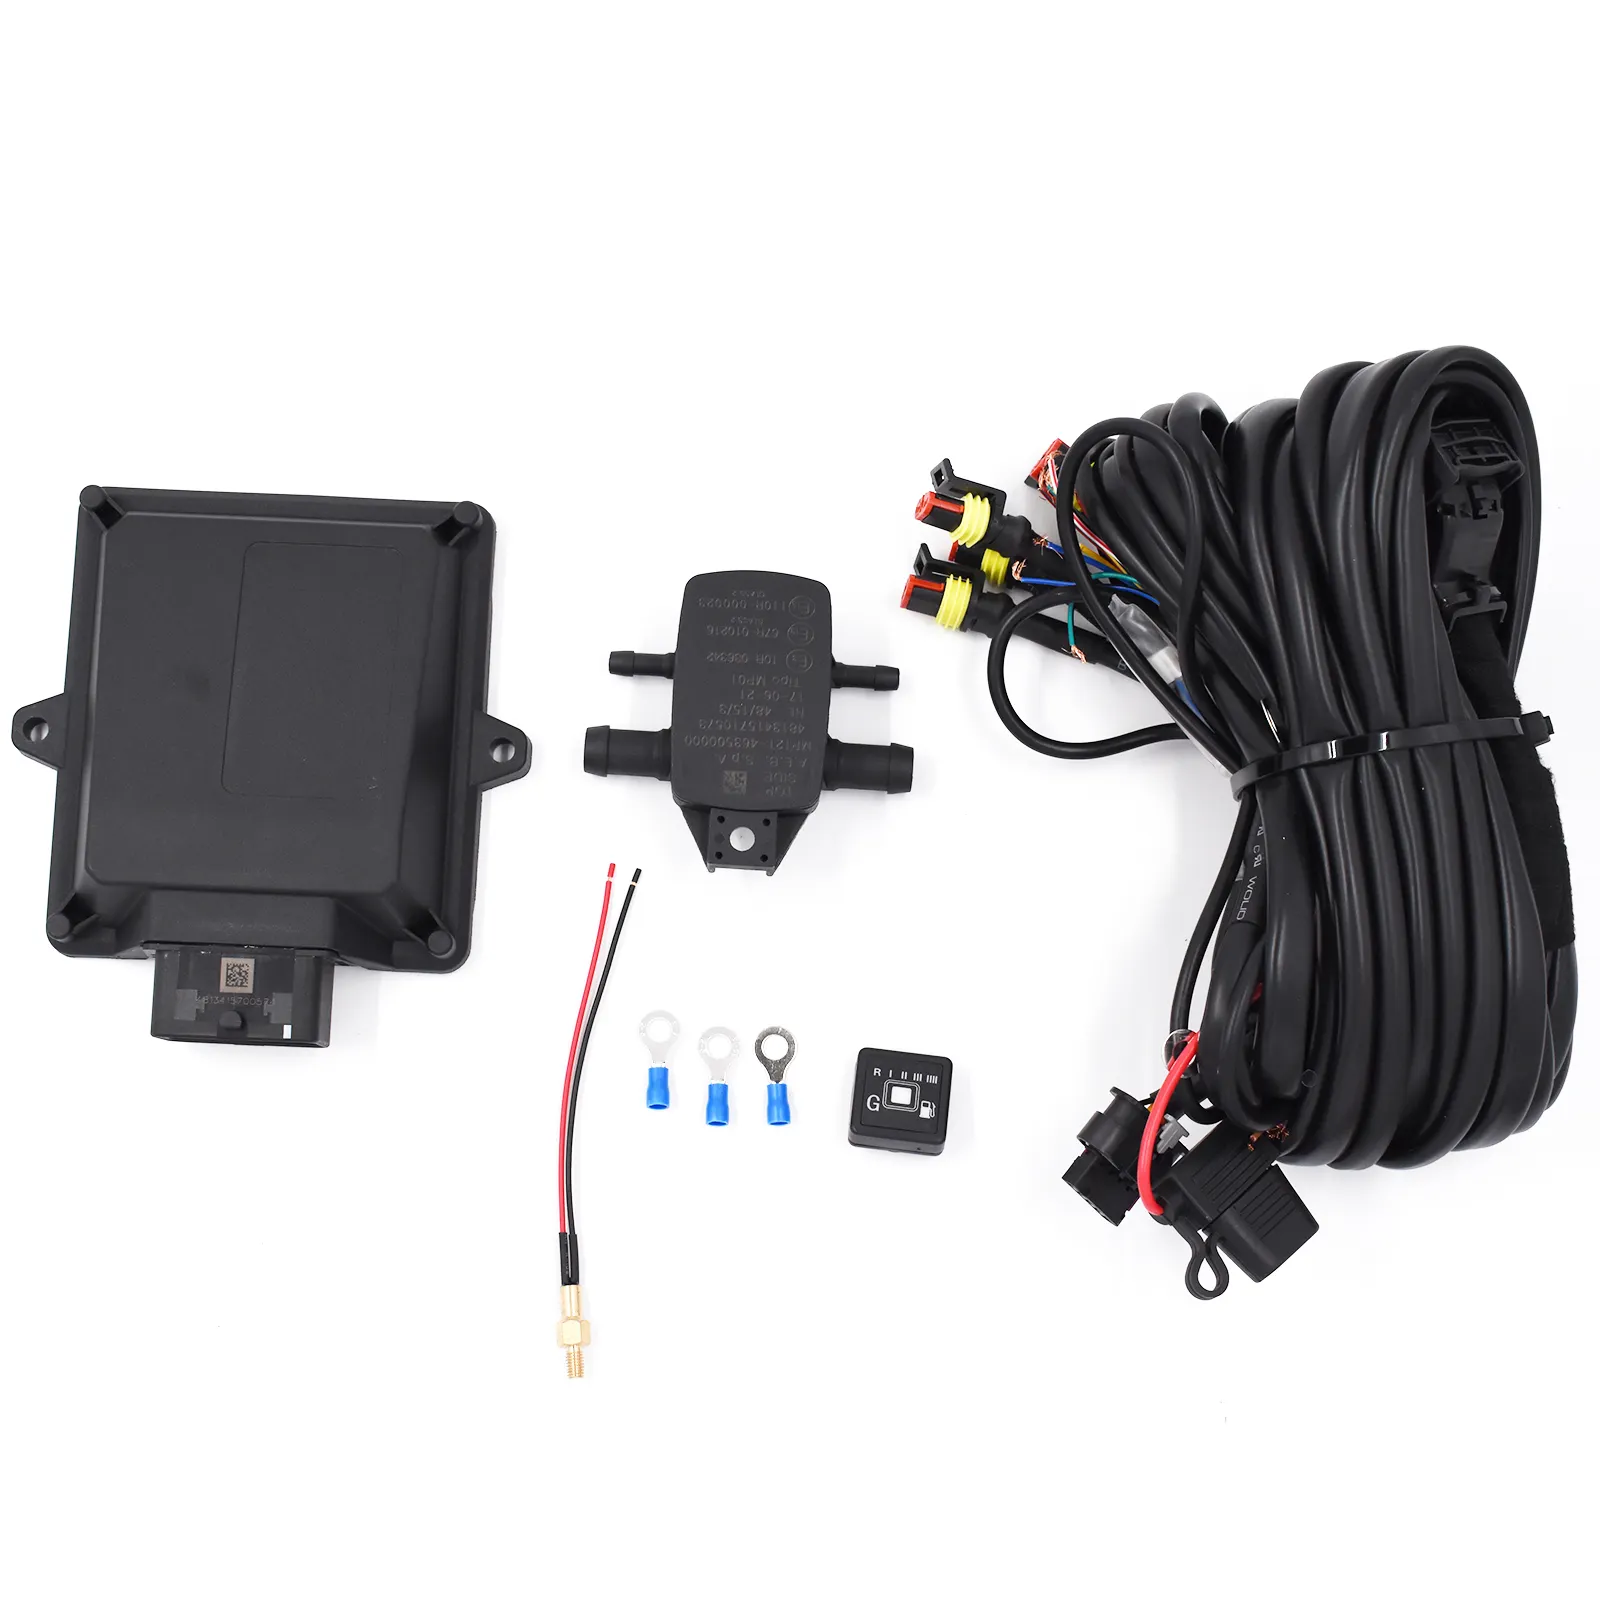 Software Customized Mp48 Sequential Injection System Car Conversion Kit Ecu 4cyl Aeb Digi Omvl Cng Lpg Gnv Glp Otogaz Gpl Ngv